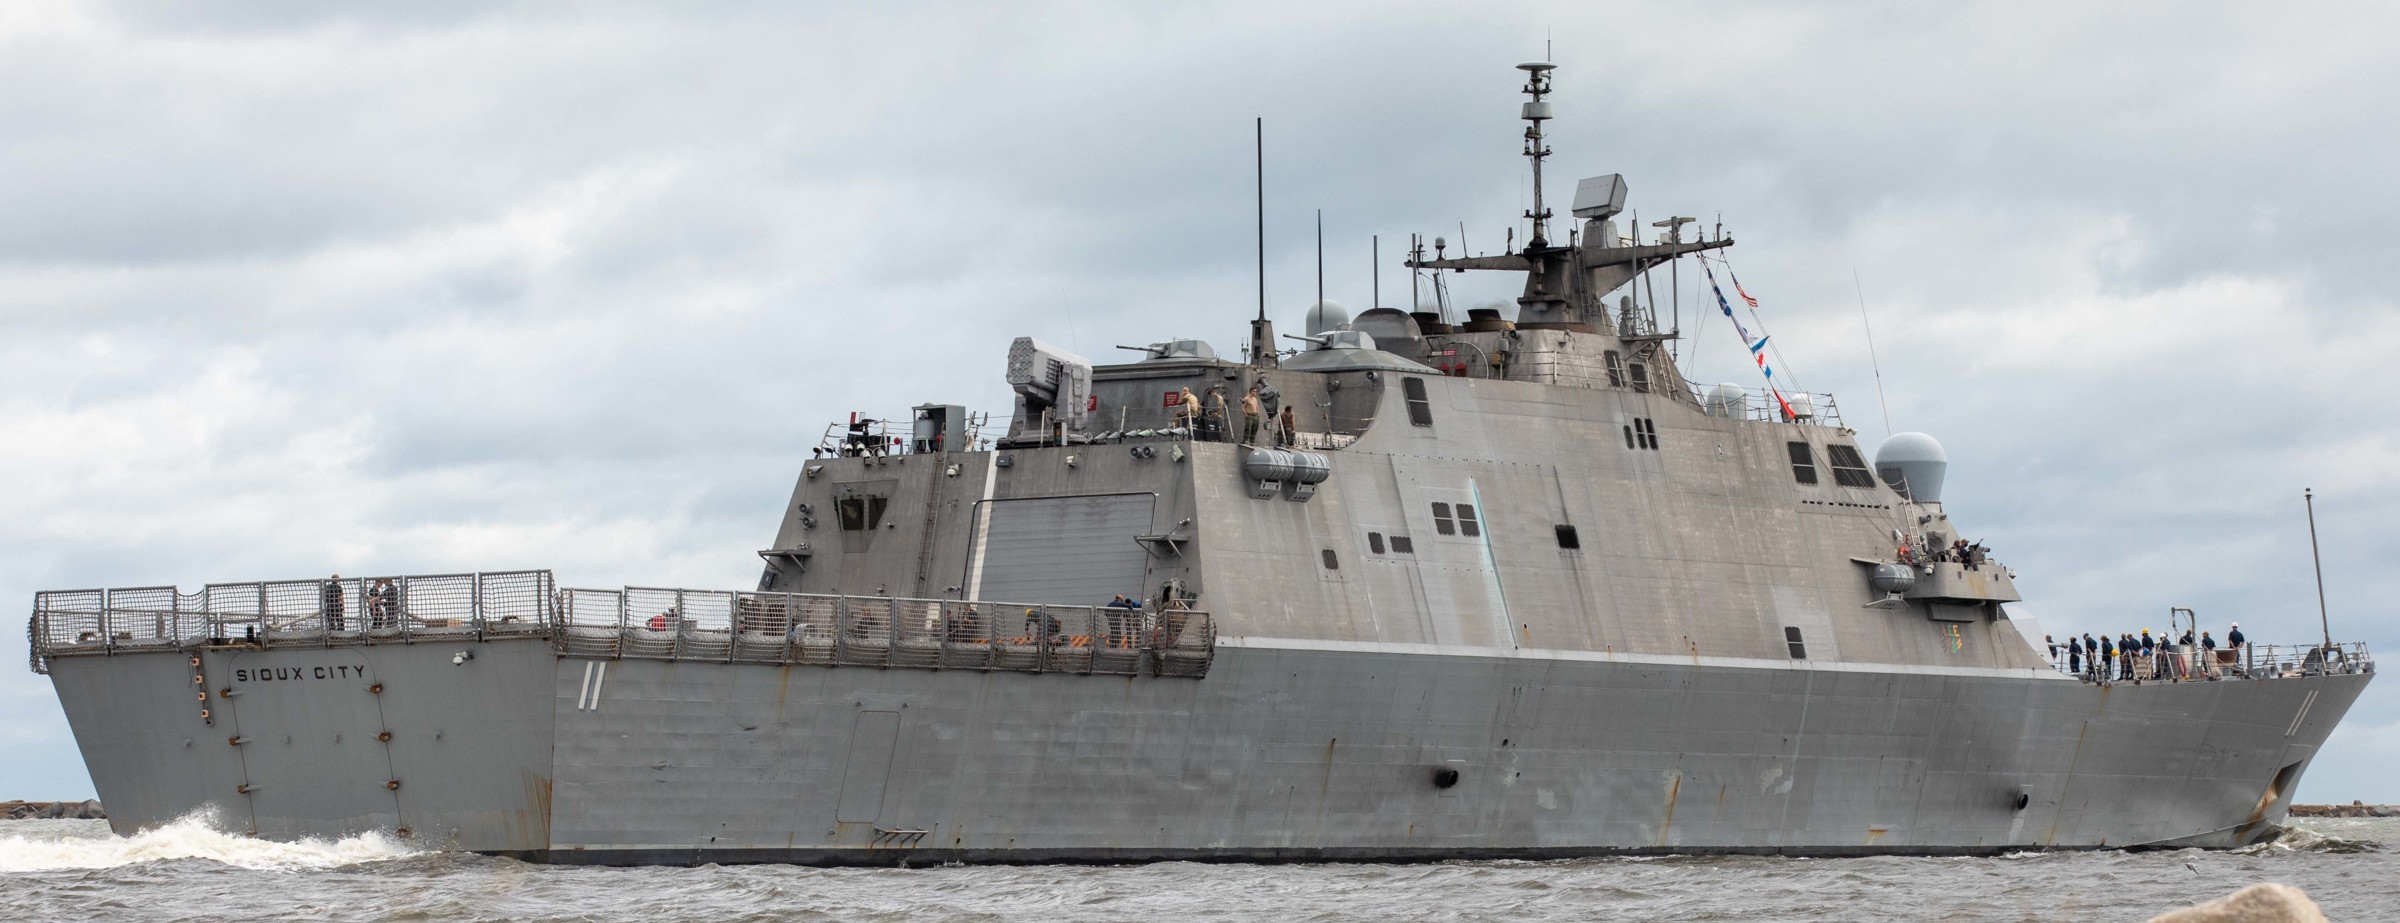 lcs-11 uss sioux city freedom class littoral combat ship us navy naval station mayport florida 83